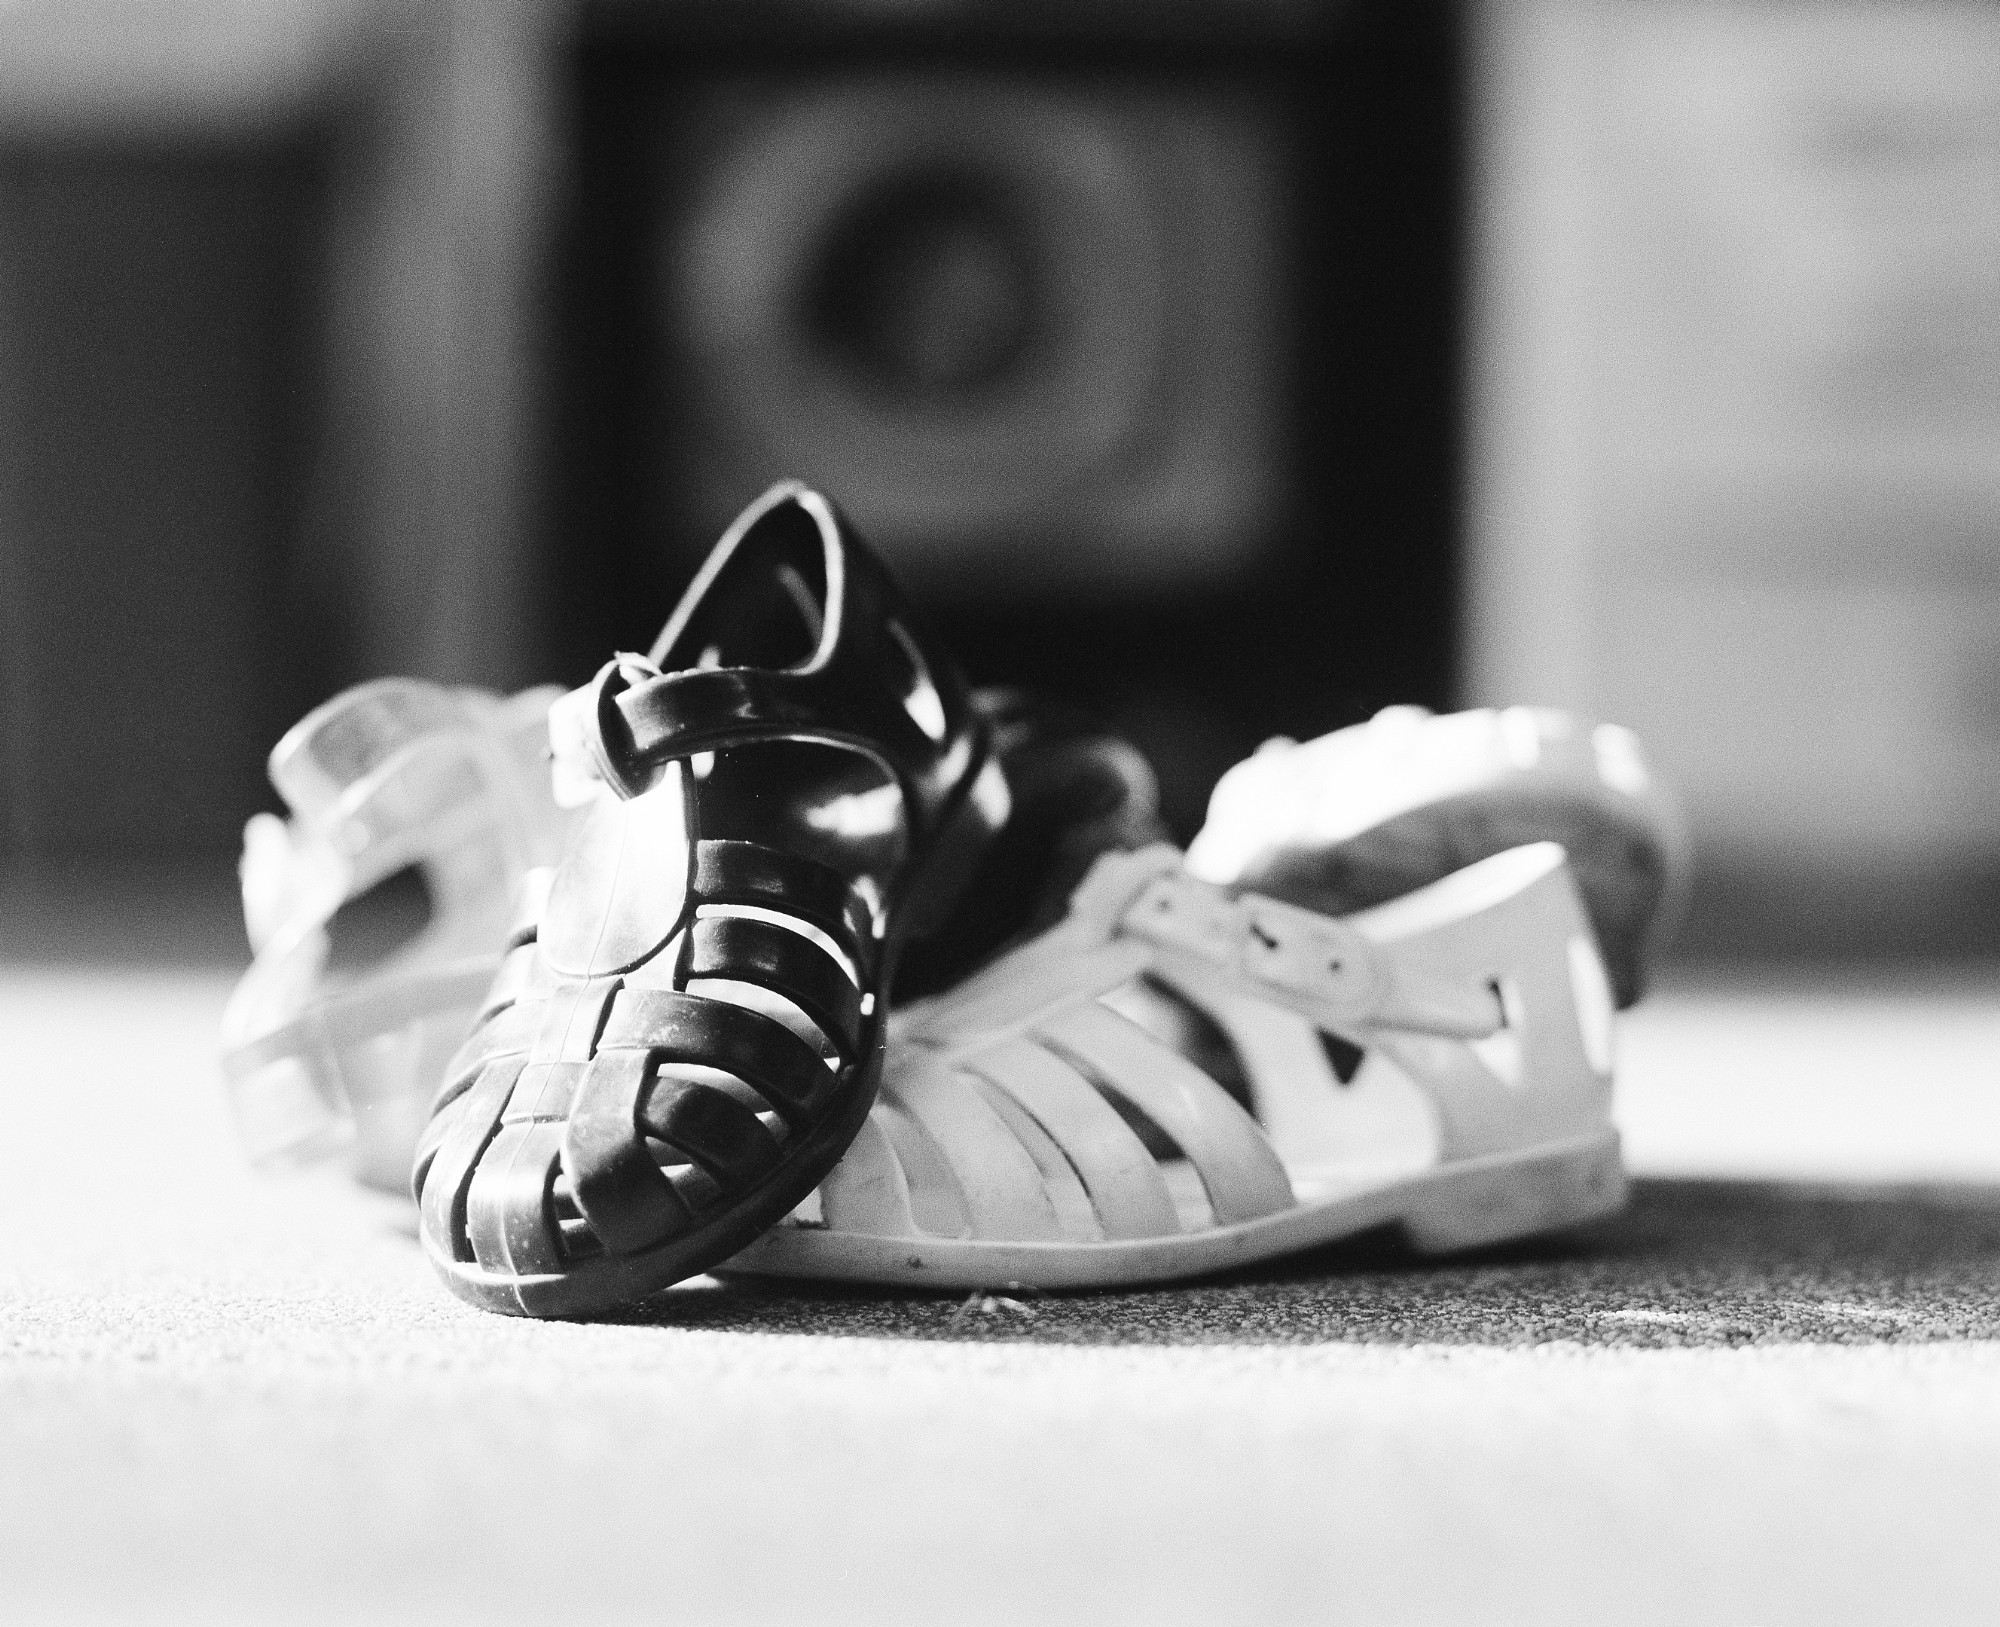 "Left alone toddler jelly shoes", Cambridge, 2020 120mm black and white film. Diane-Laure Mussy.